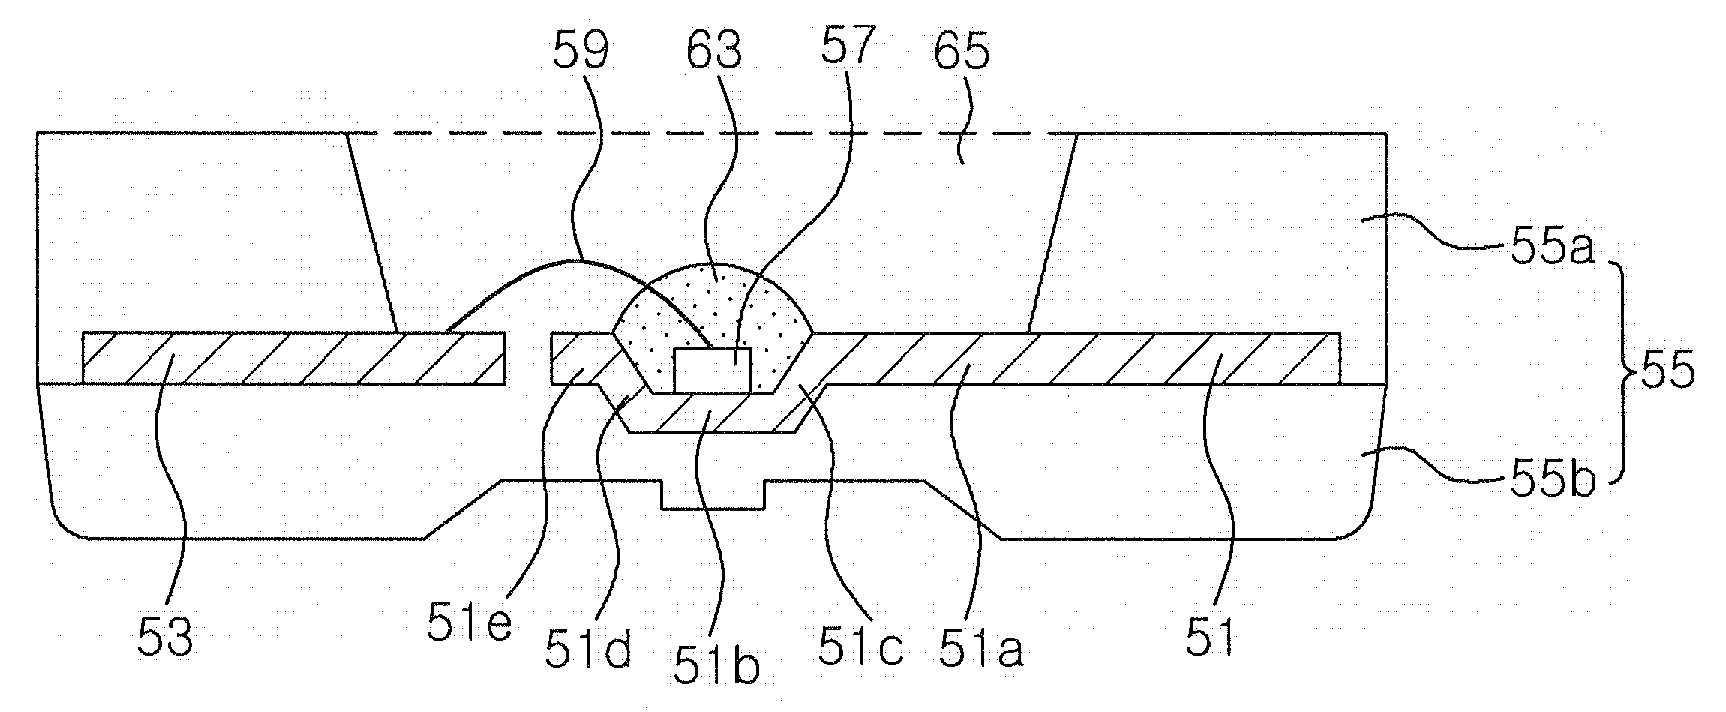 Light emitting diode package employing lead terminal with reflecting surface